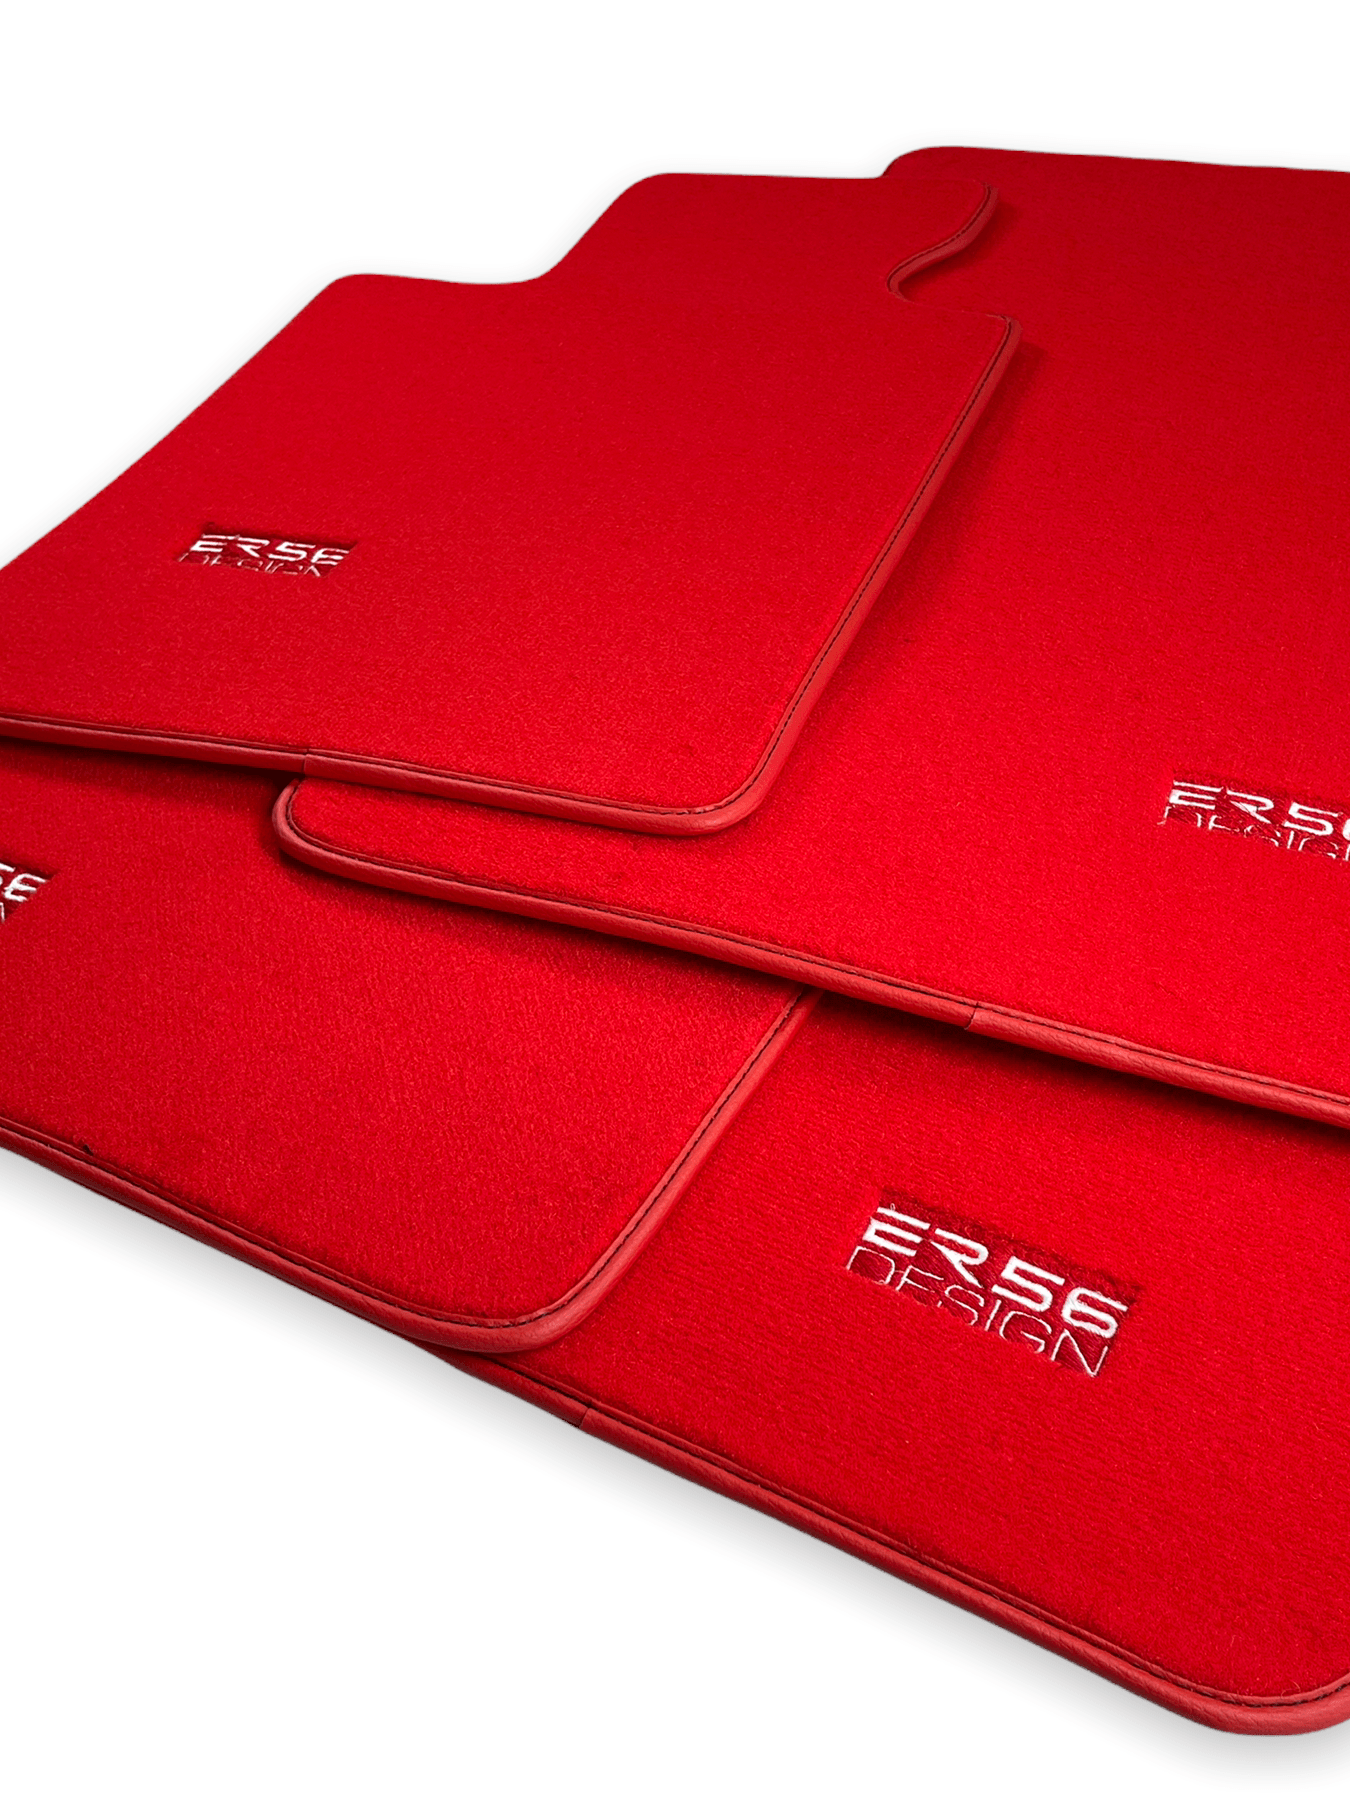 Red Floor Mats For BMW 6 Series F06 Gran Coupe - ER56 Design Brand - AutoWin